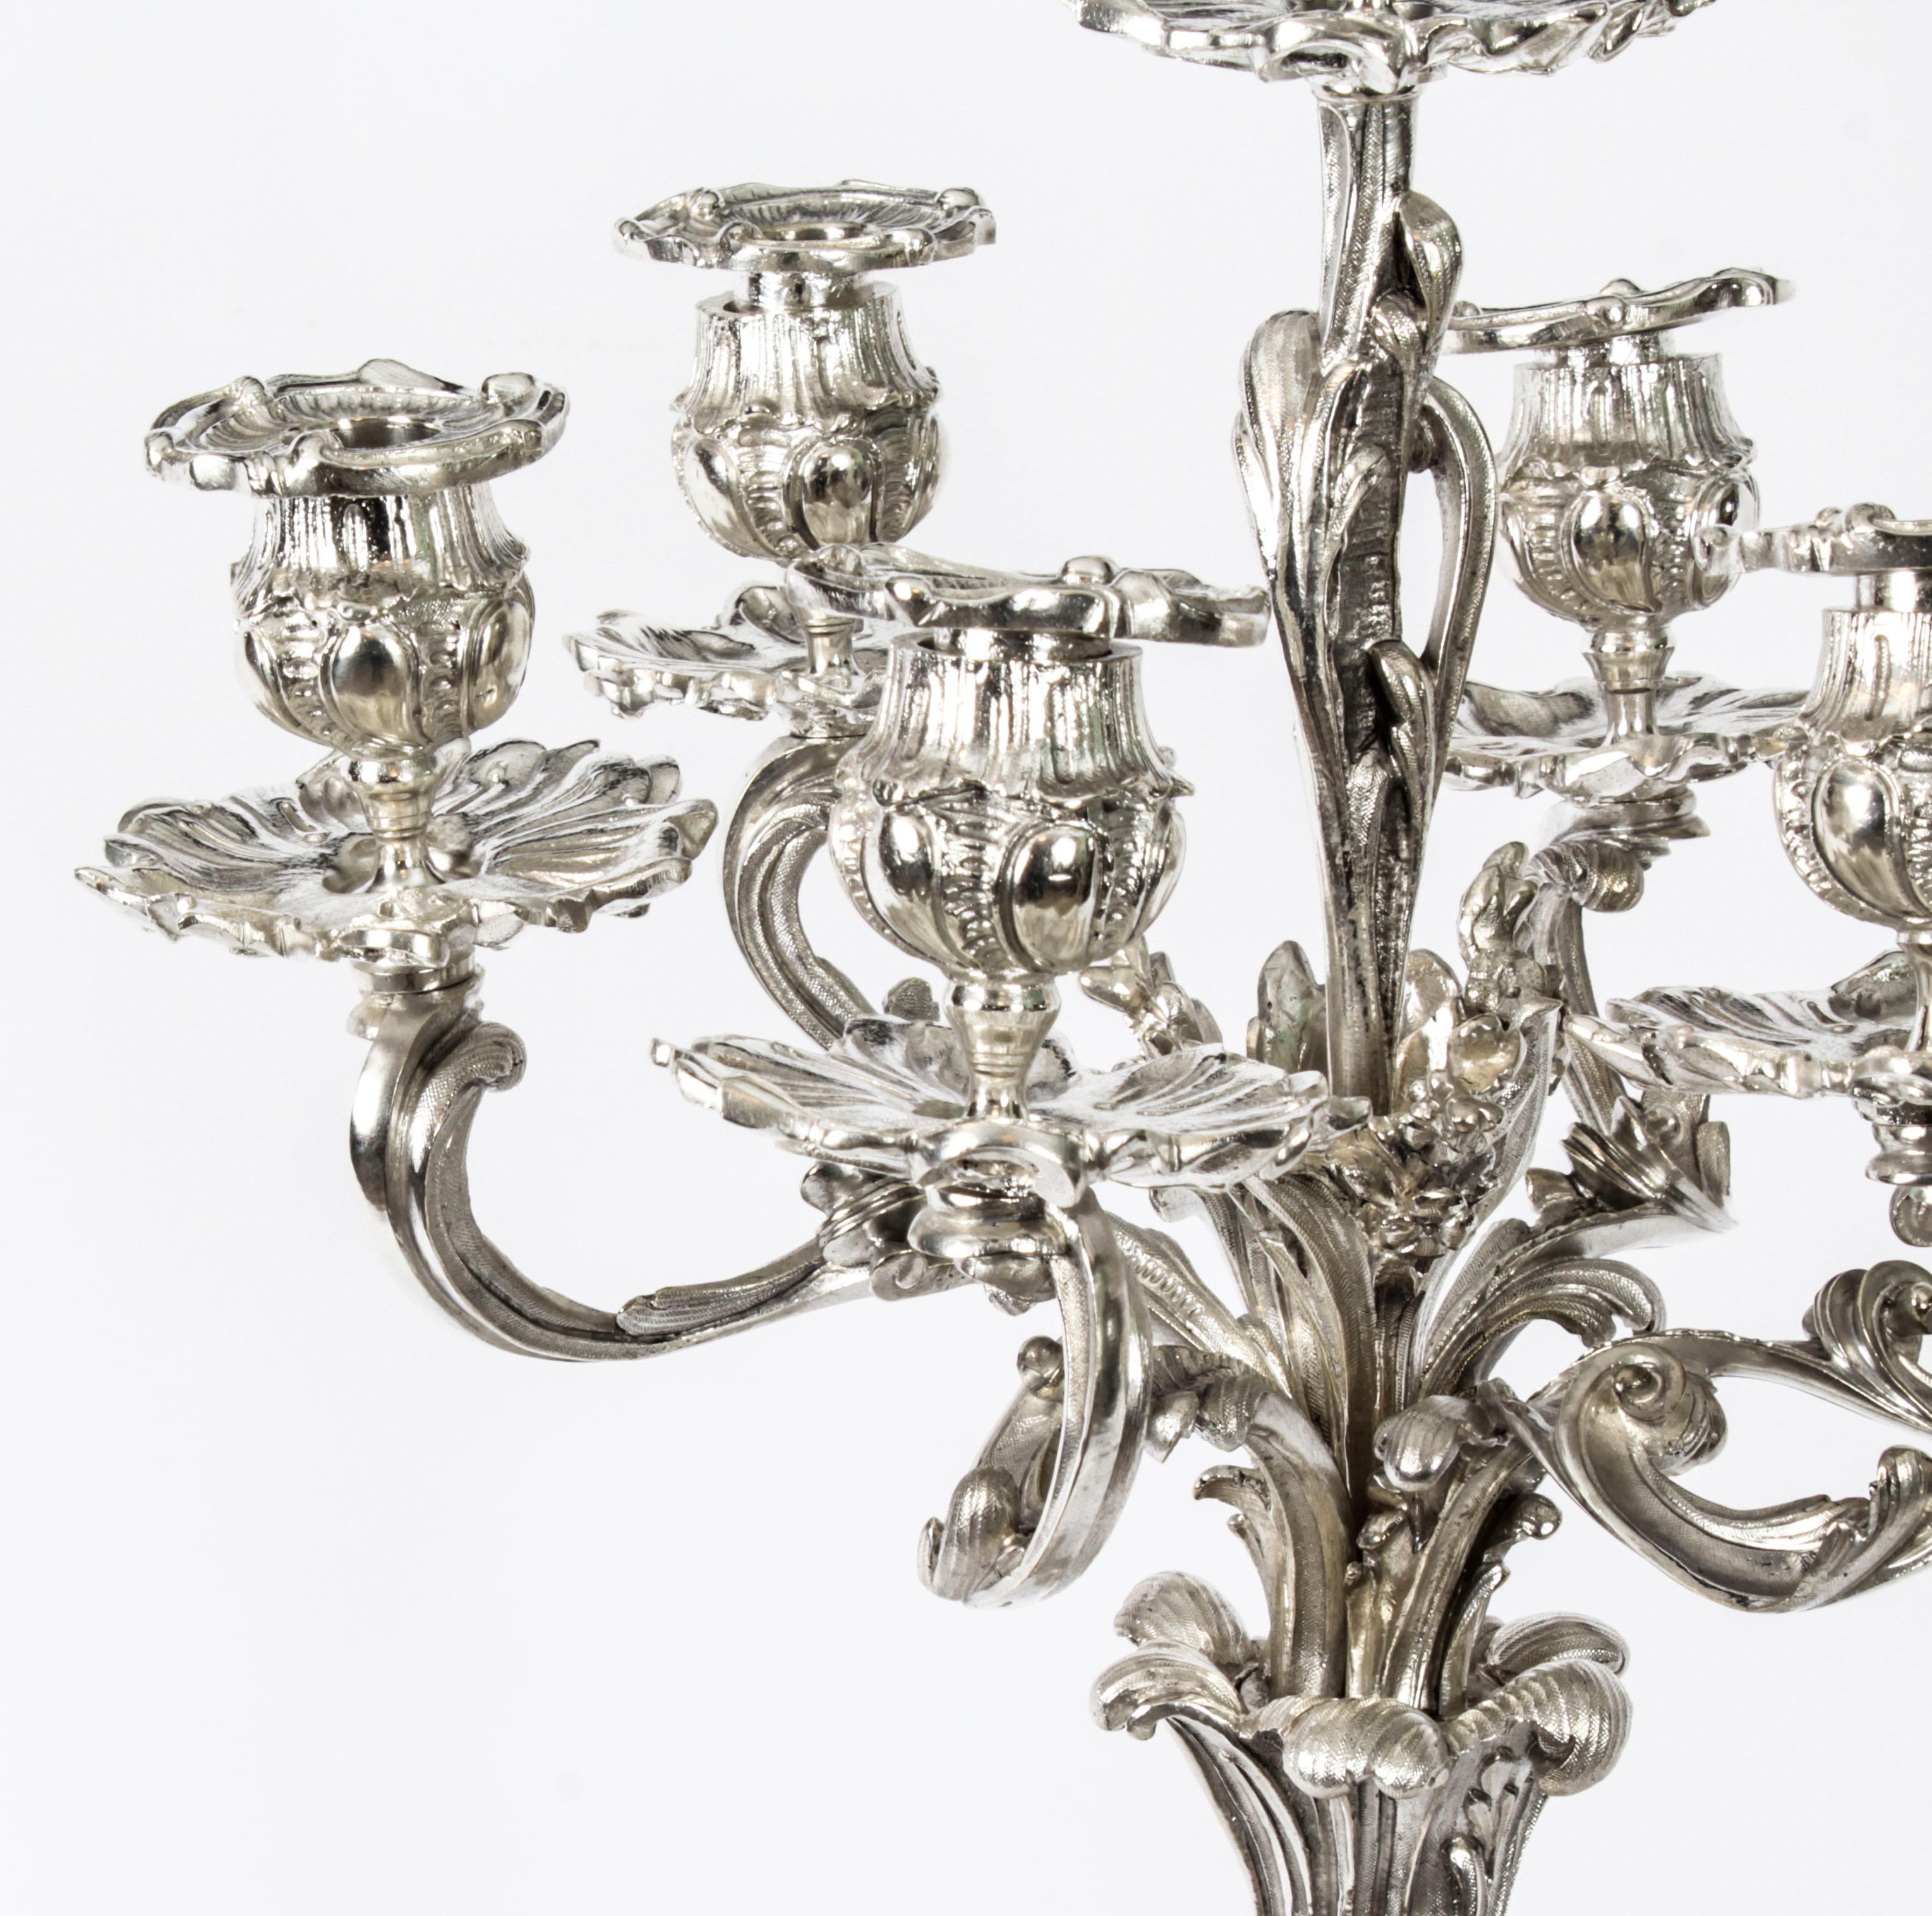 Antique Pair French Rococo Revival 7 Light Silver Plated Candelabra 1920s 1